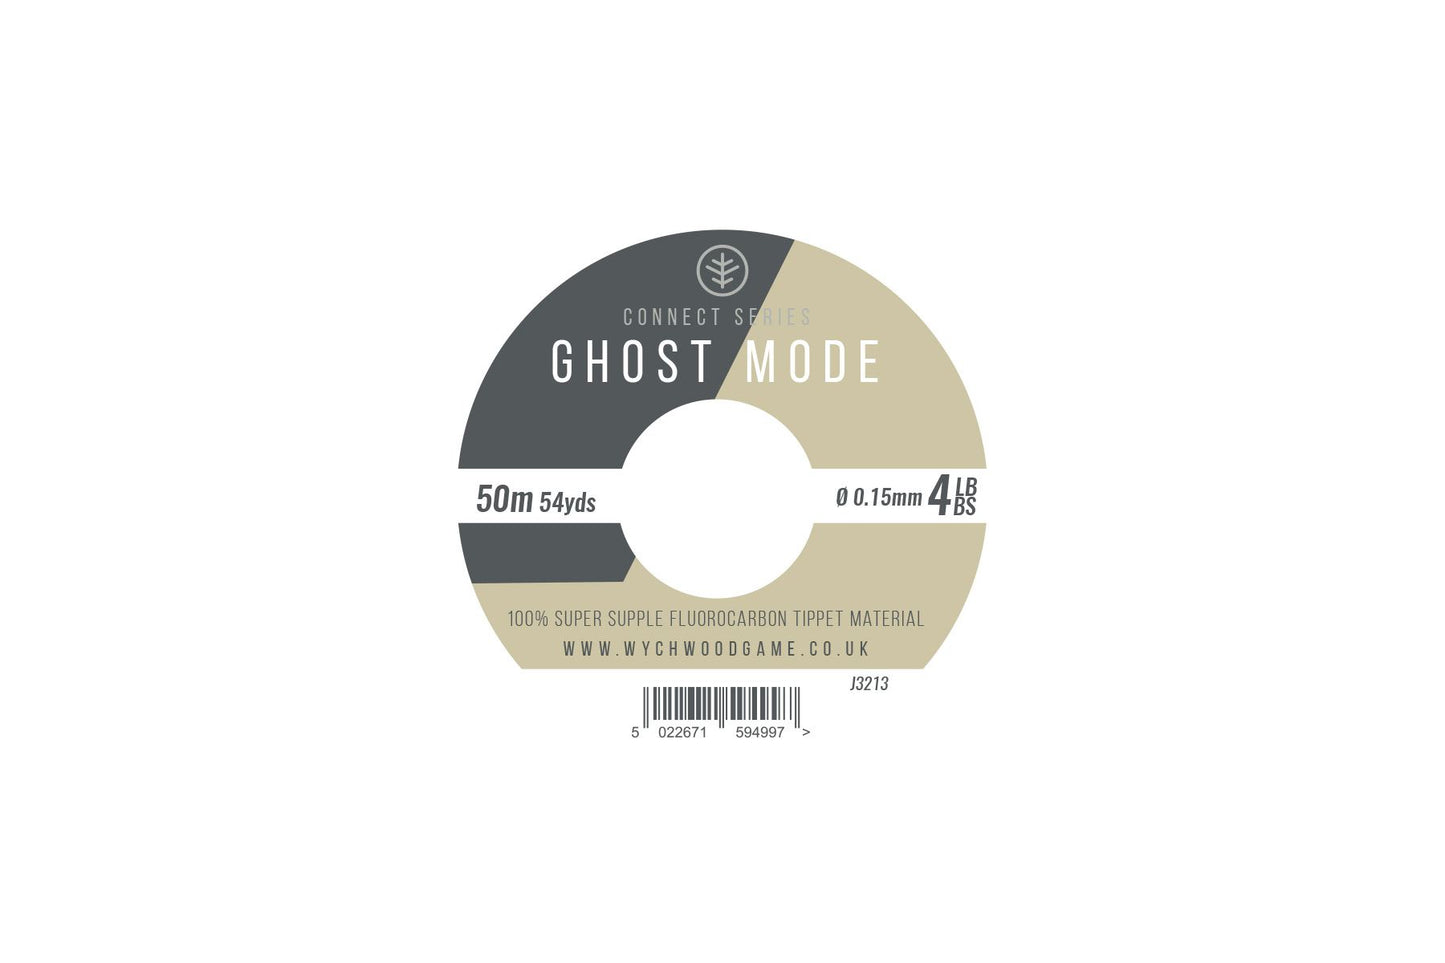 Wychwood Ghost Mode Fluorocarbon 50m Tippet 4lb